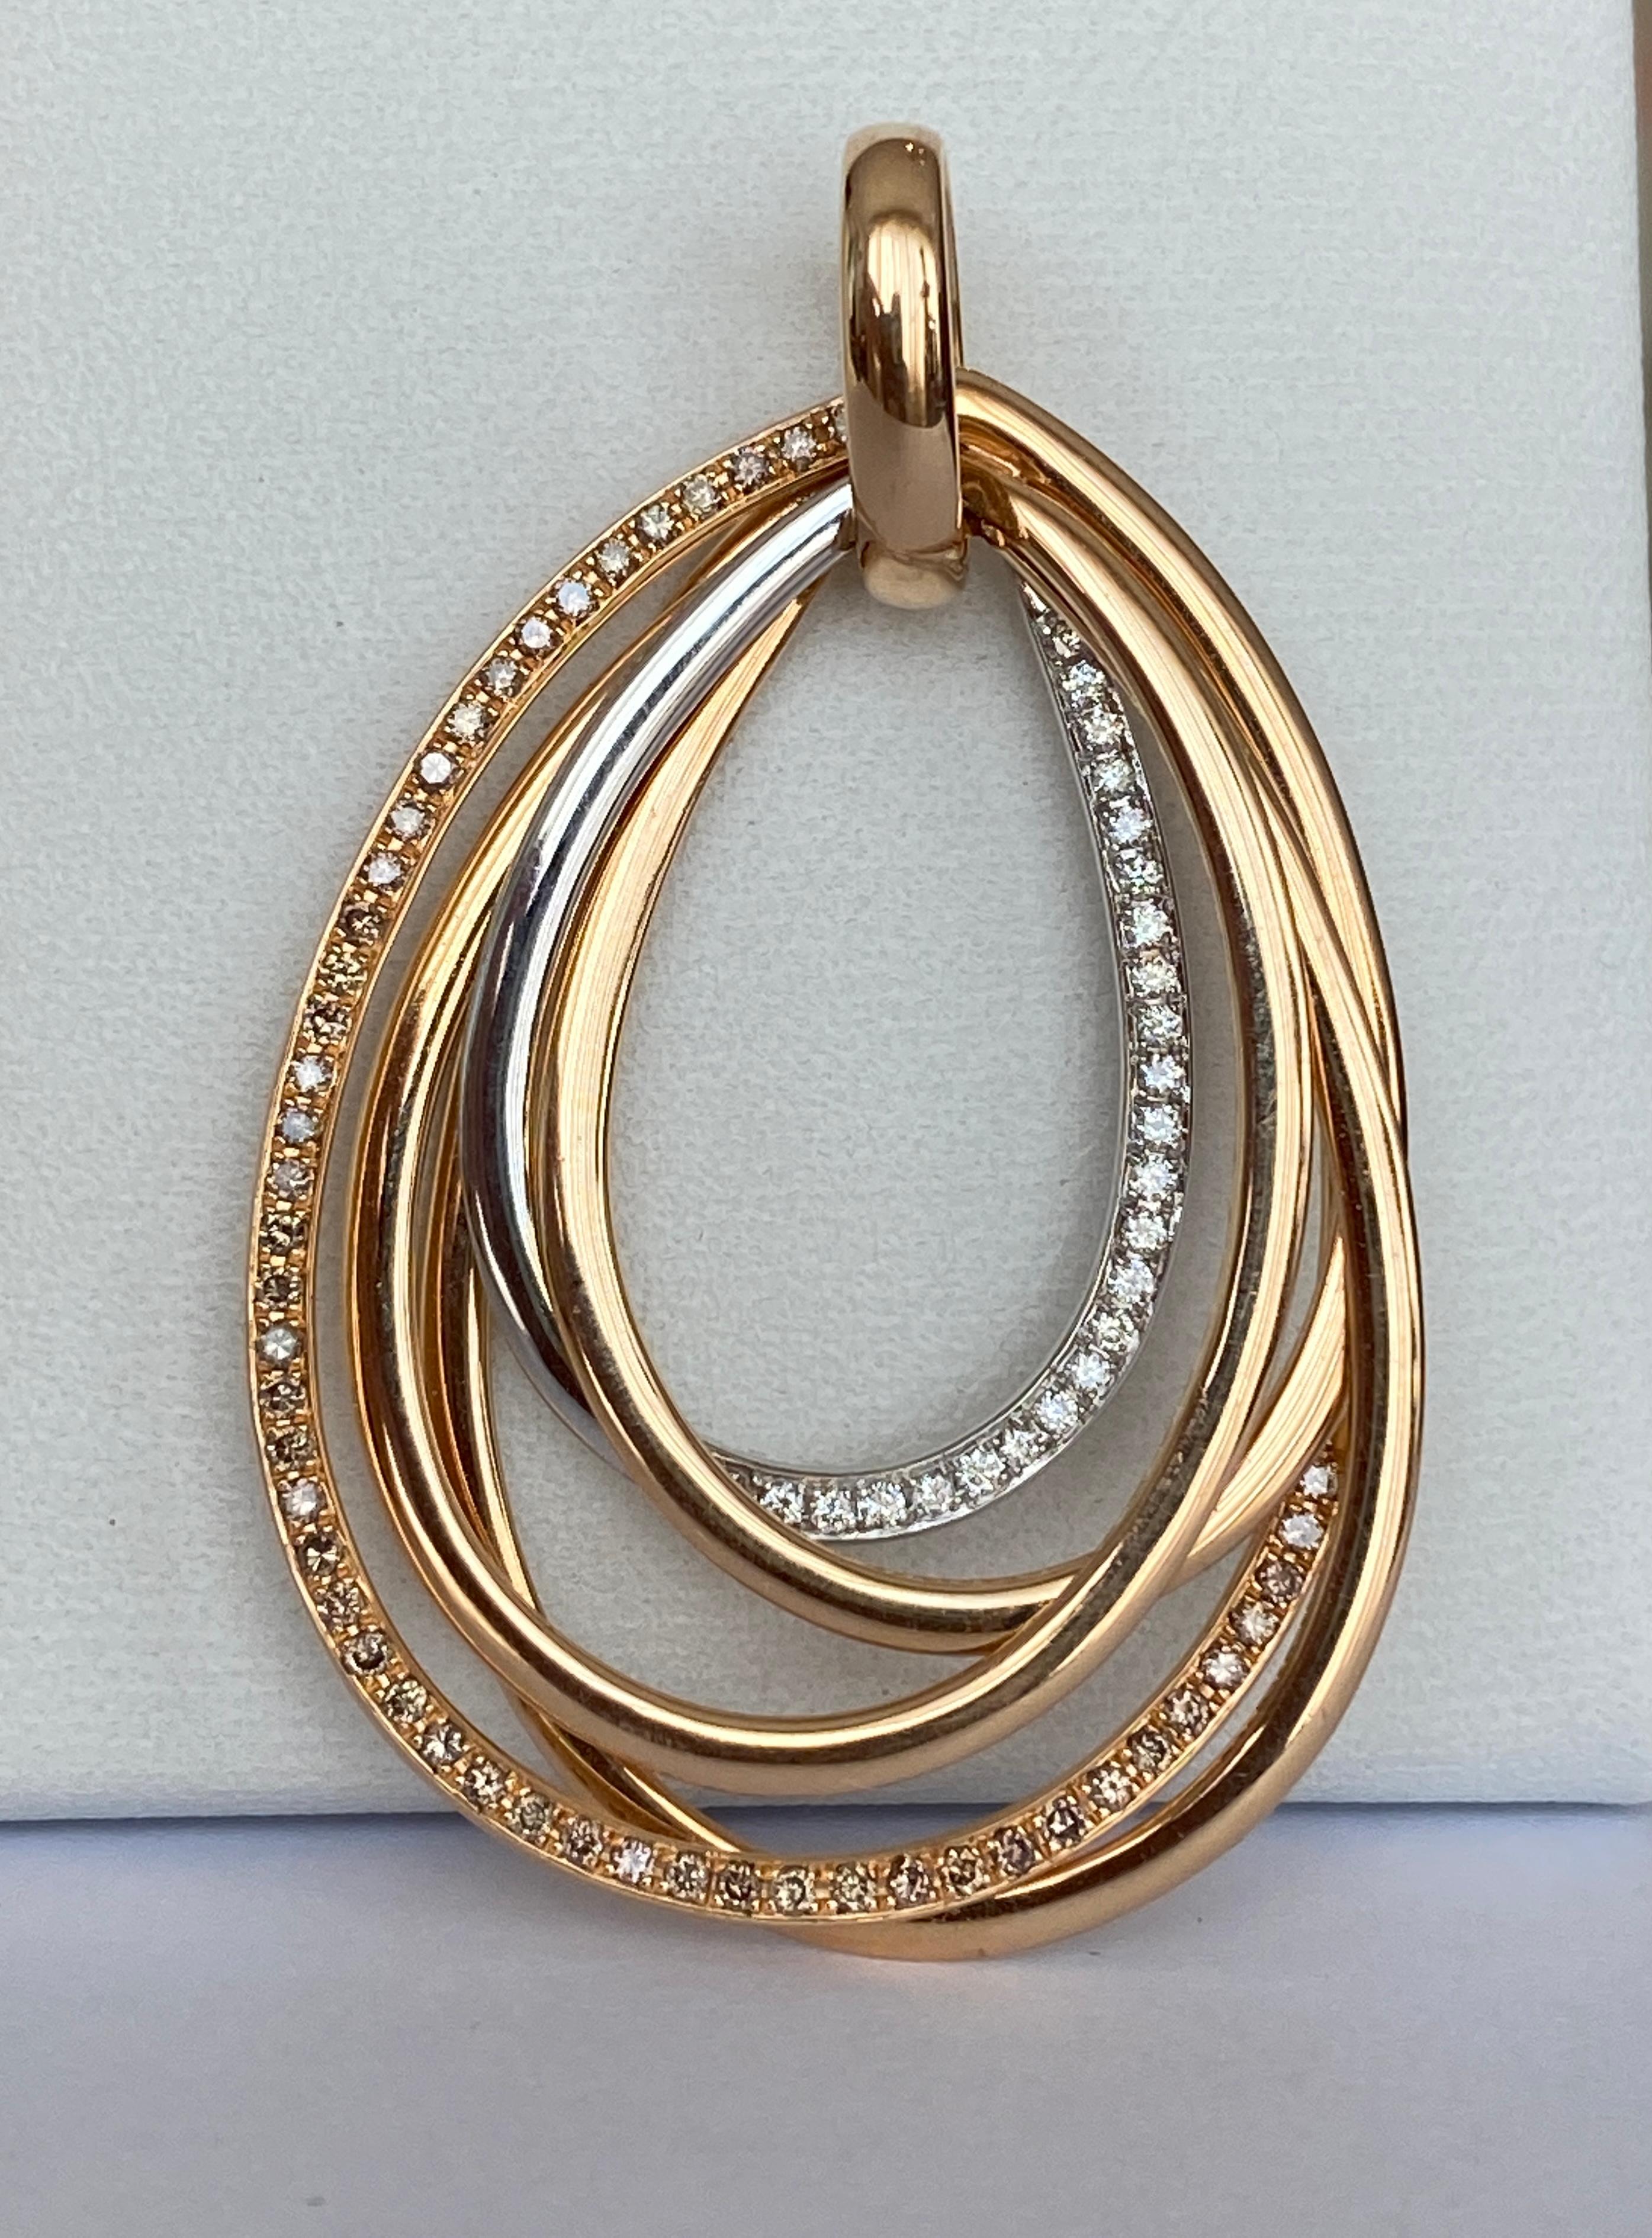 Offered Al Coro, 18 kt gold Serenata pendant, made up of several loops in rose  and white gold, partly set with white 24 stones brilliant cut diamonds – 0,16 ct G/VS  and 52 brown brilliant cut diamonds -0,33 ct. VS/SI .
Weight: 7.4